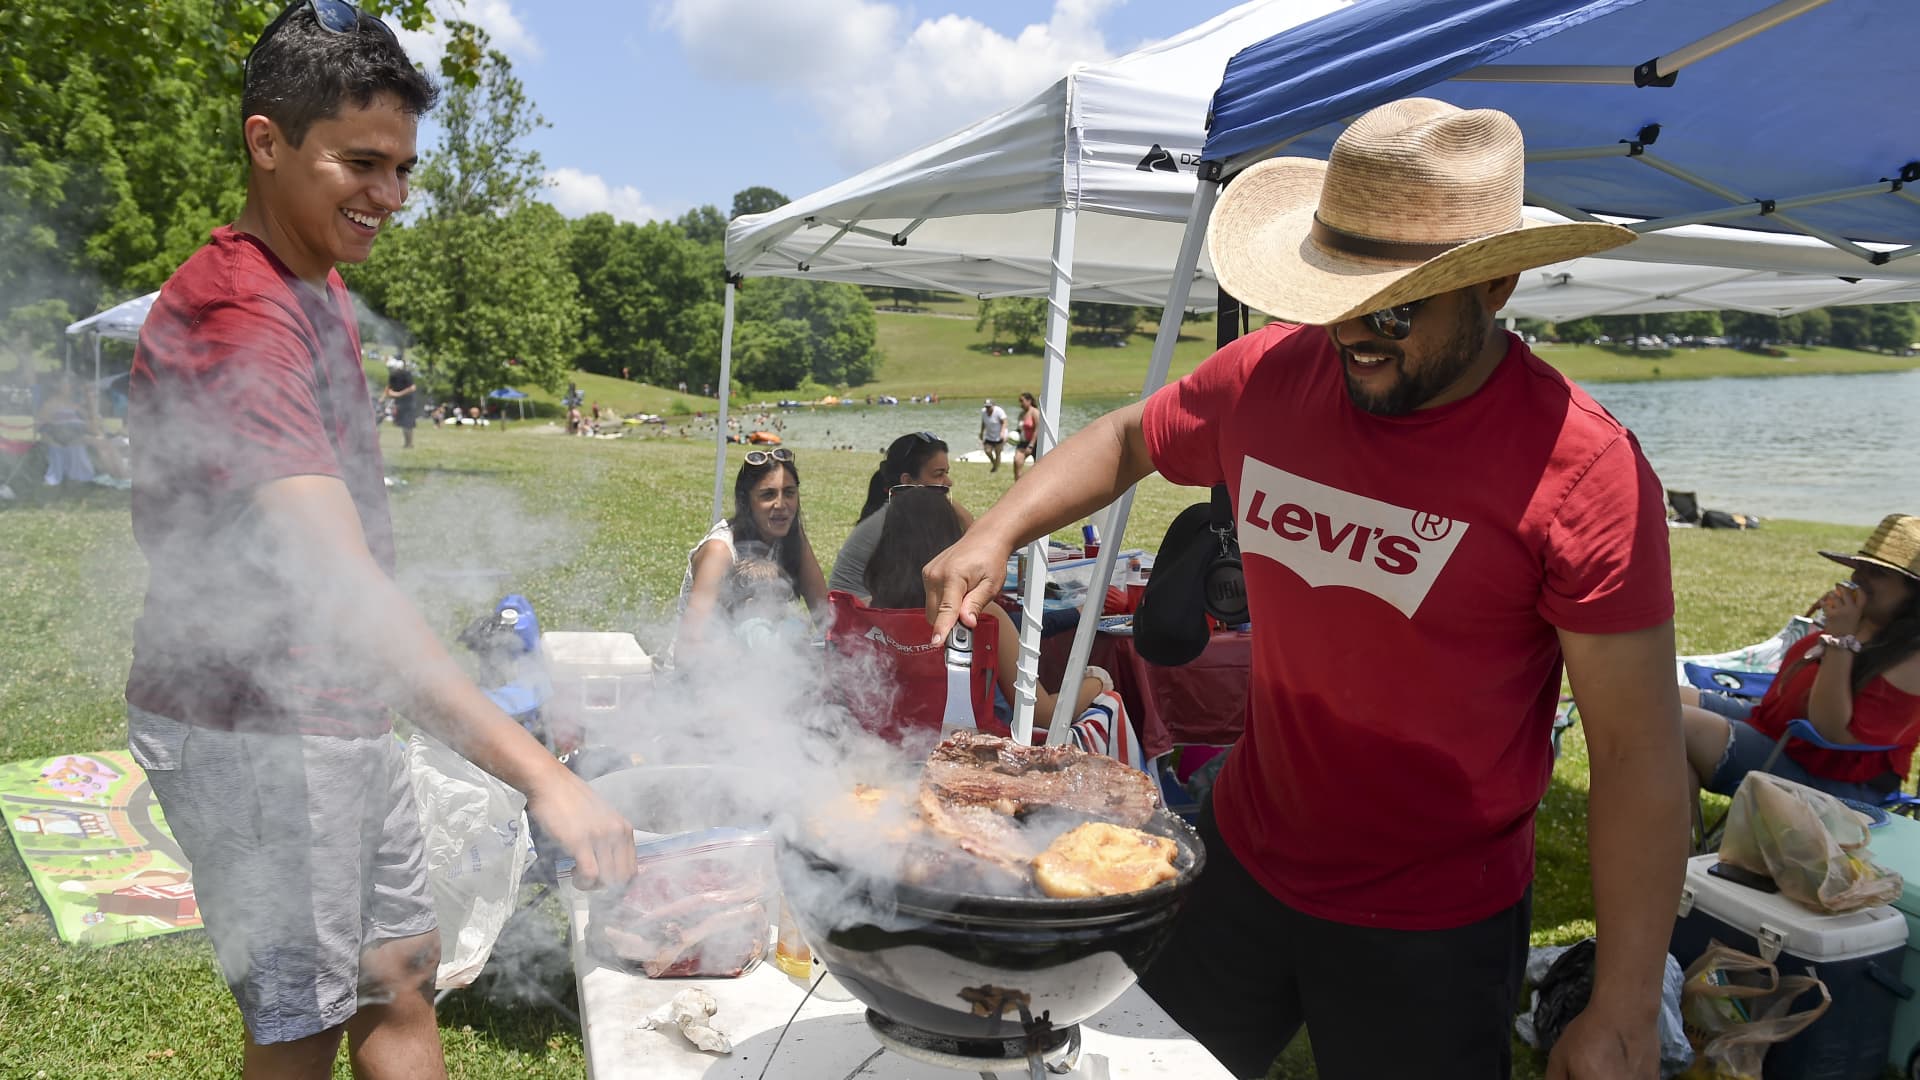 Outdoor cooking boomed during the pandemic, and the grilling industry thinks it will stay hot